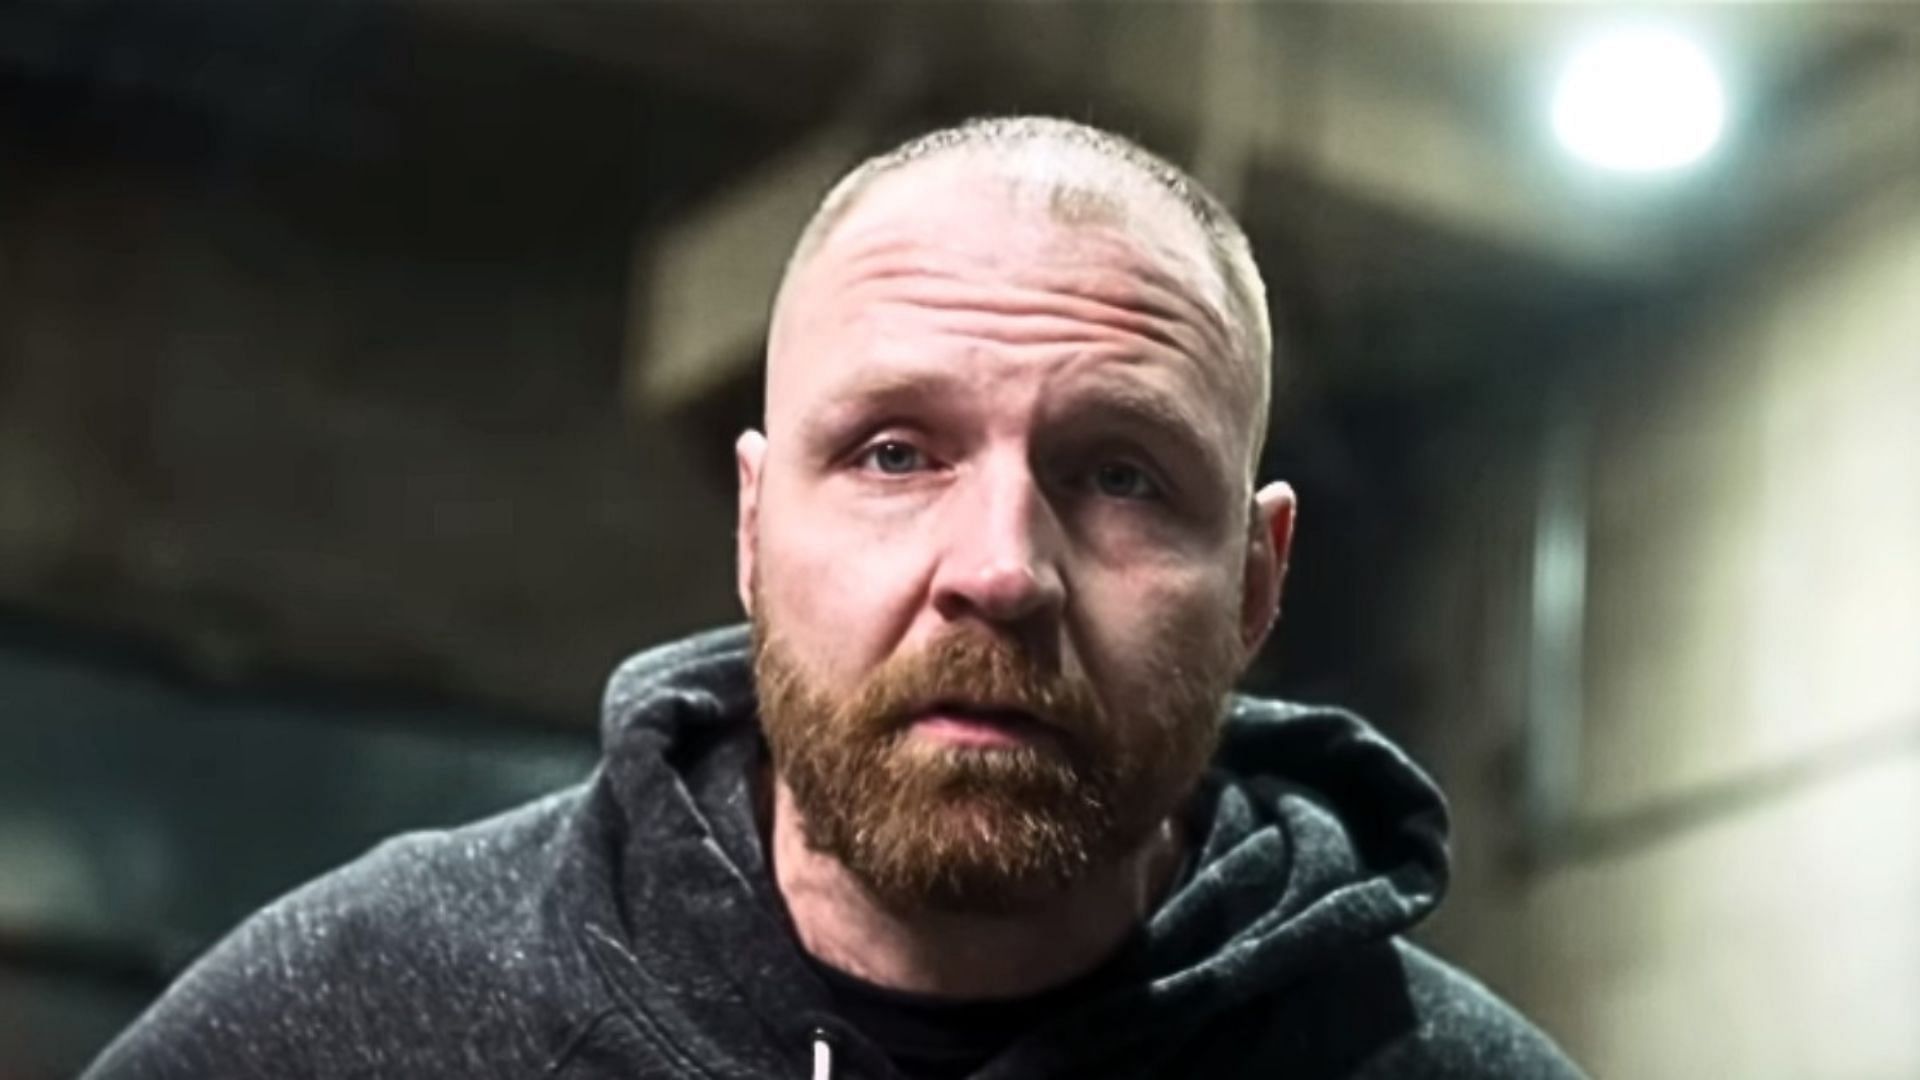 Jon Moxley is a multiple-time AEW World Champion